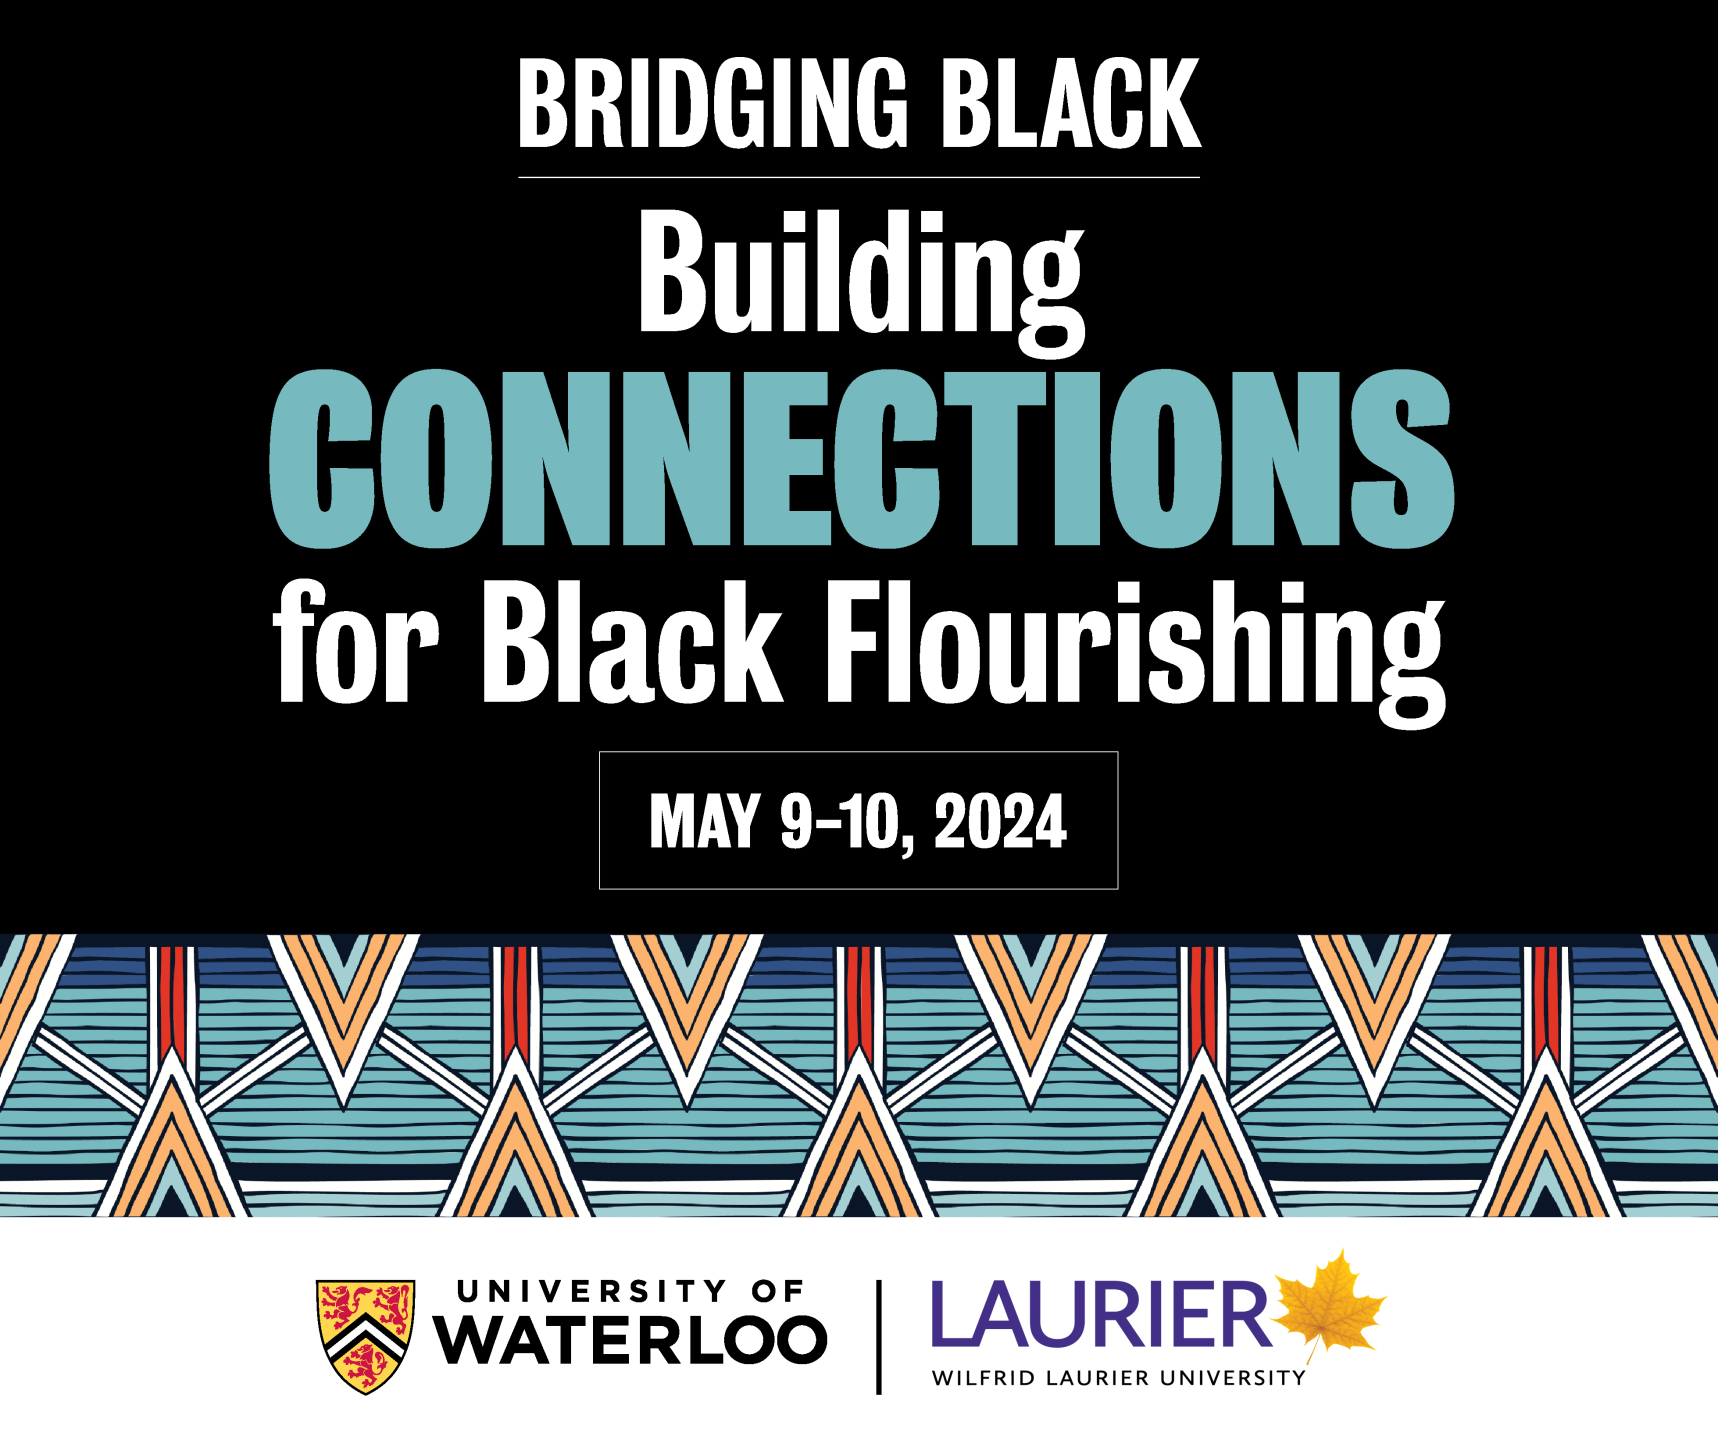 Bridging Black Building Connections for Black Flourishing May 9 and 10 | University of Waterloo and Wilfred Laurier University logos